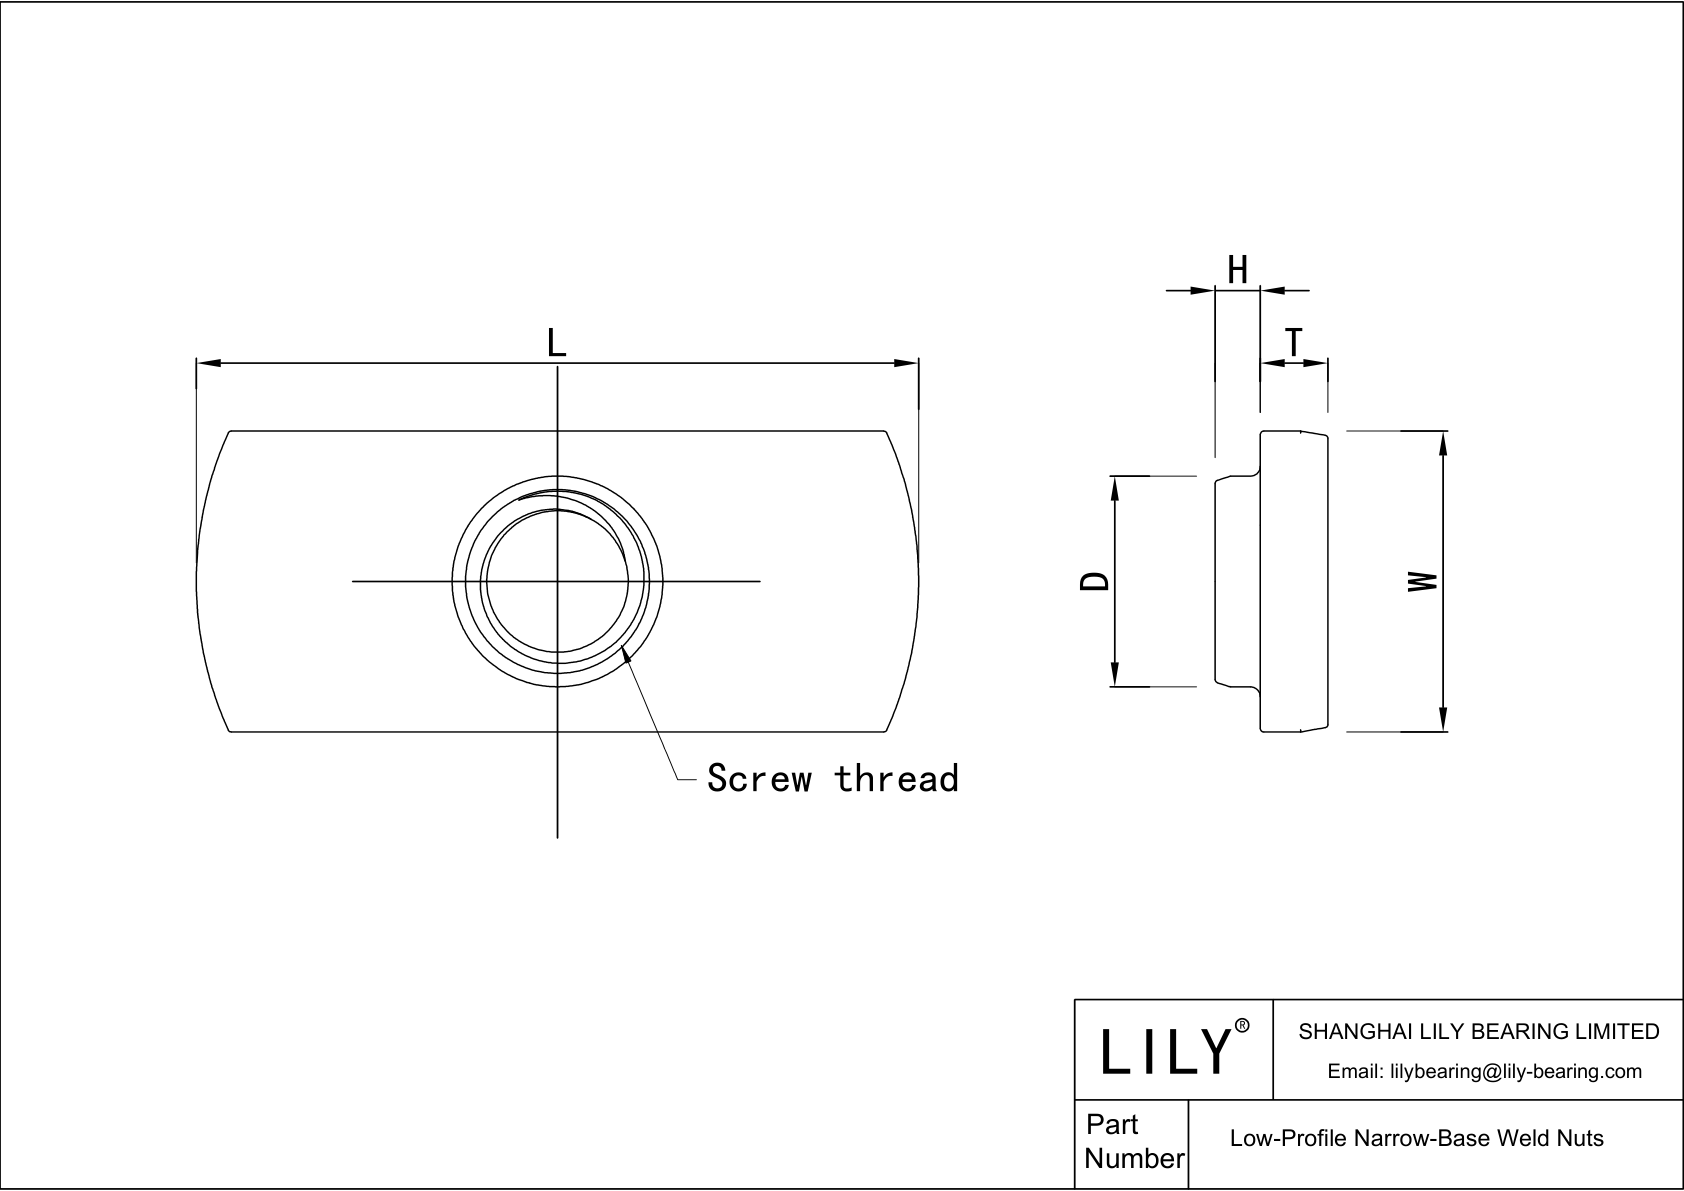 JIAABABEF Low-Profile Narrow-Base Weld Nuts cad drawing